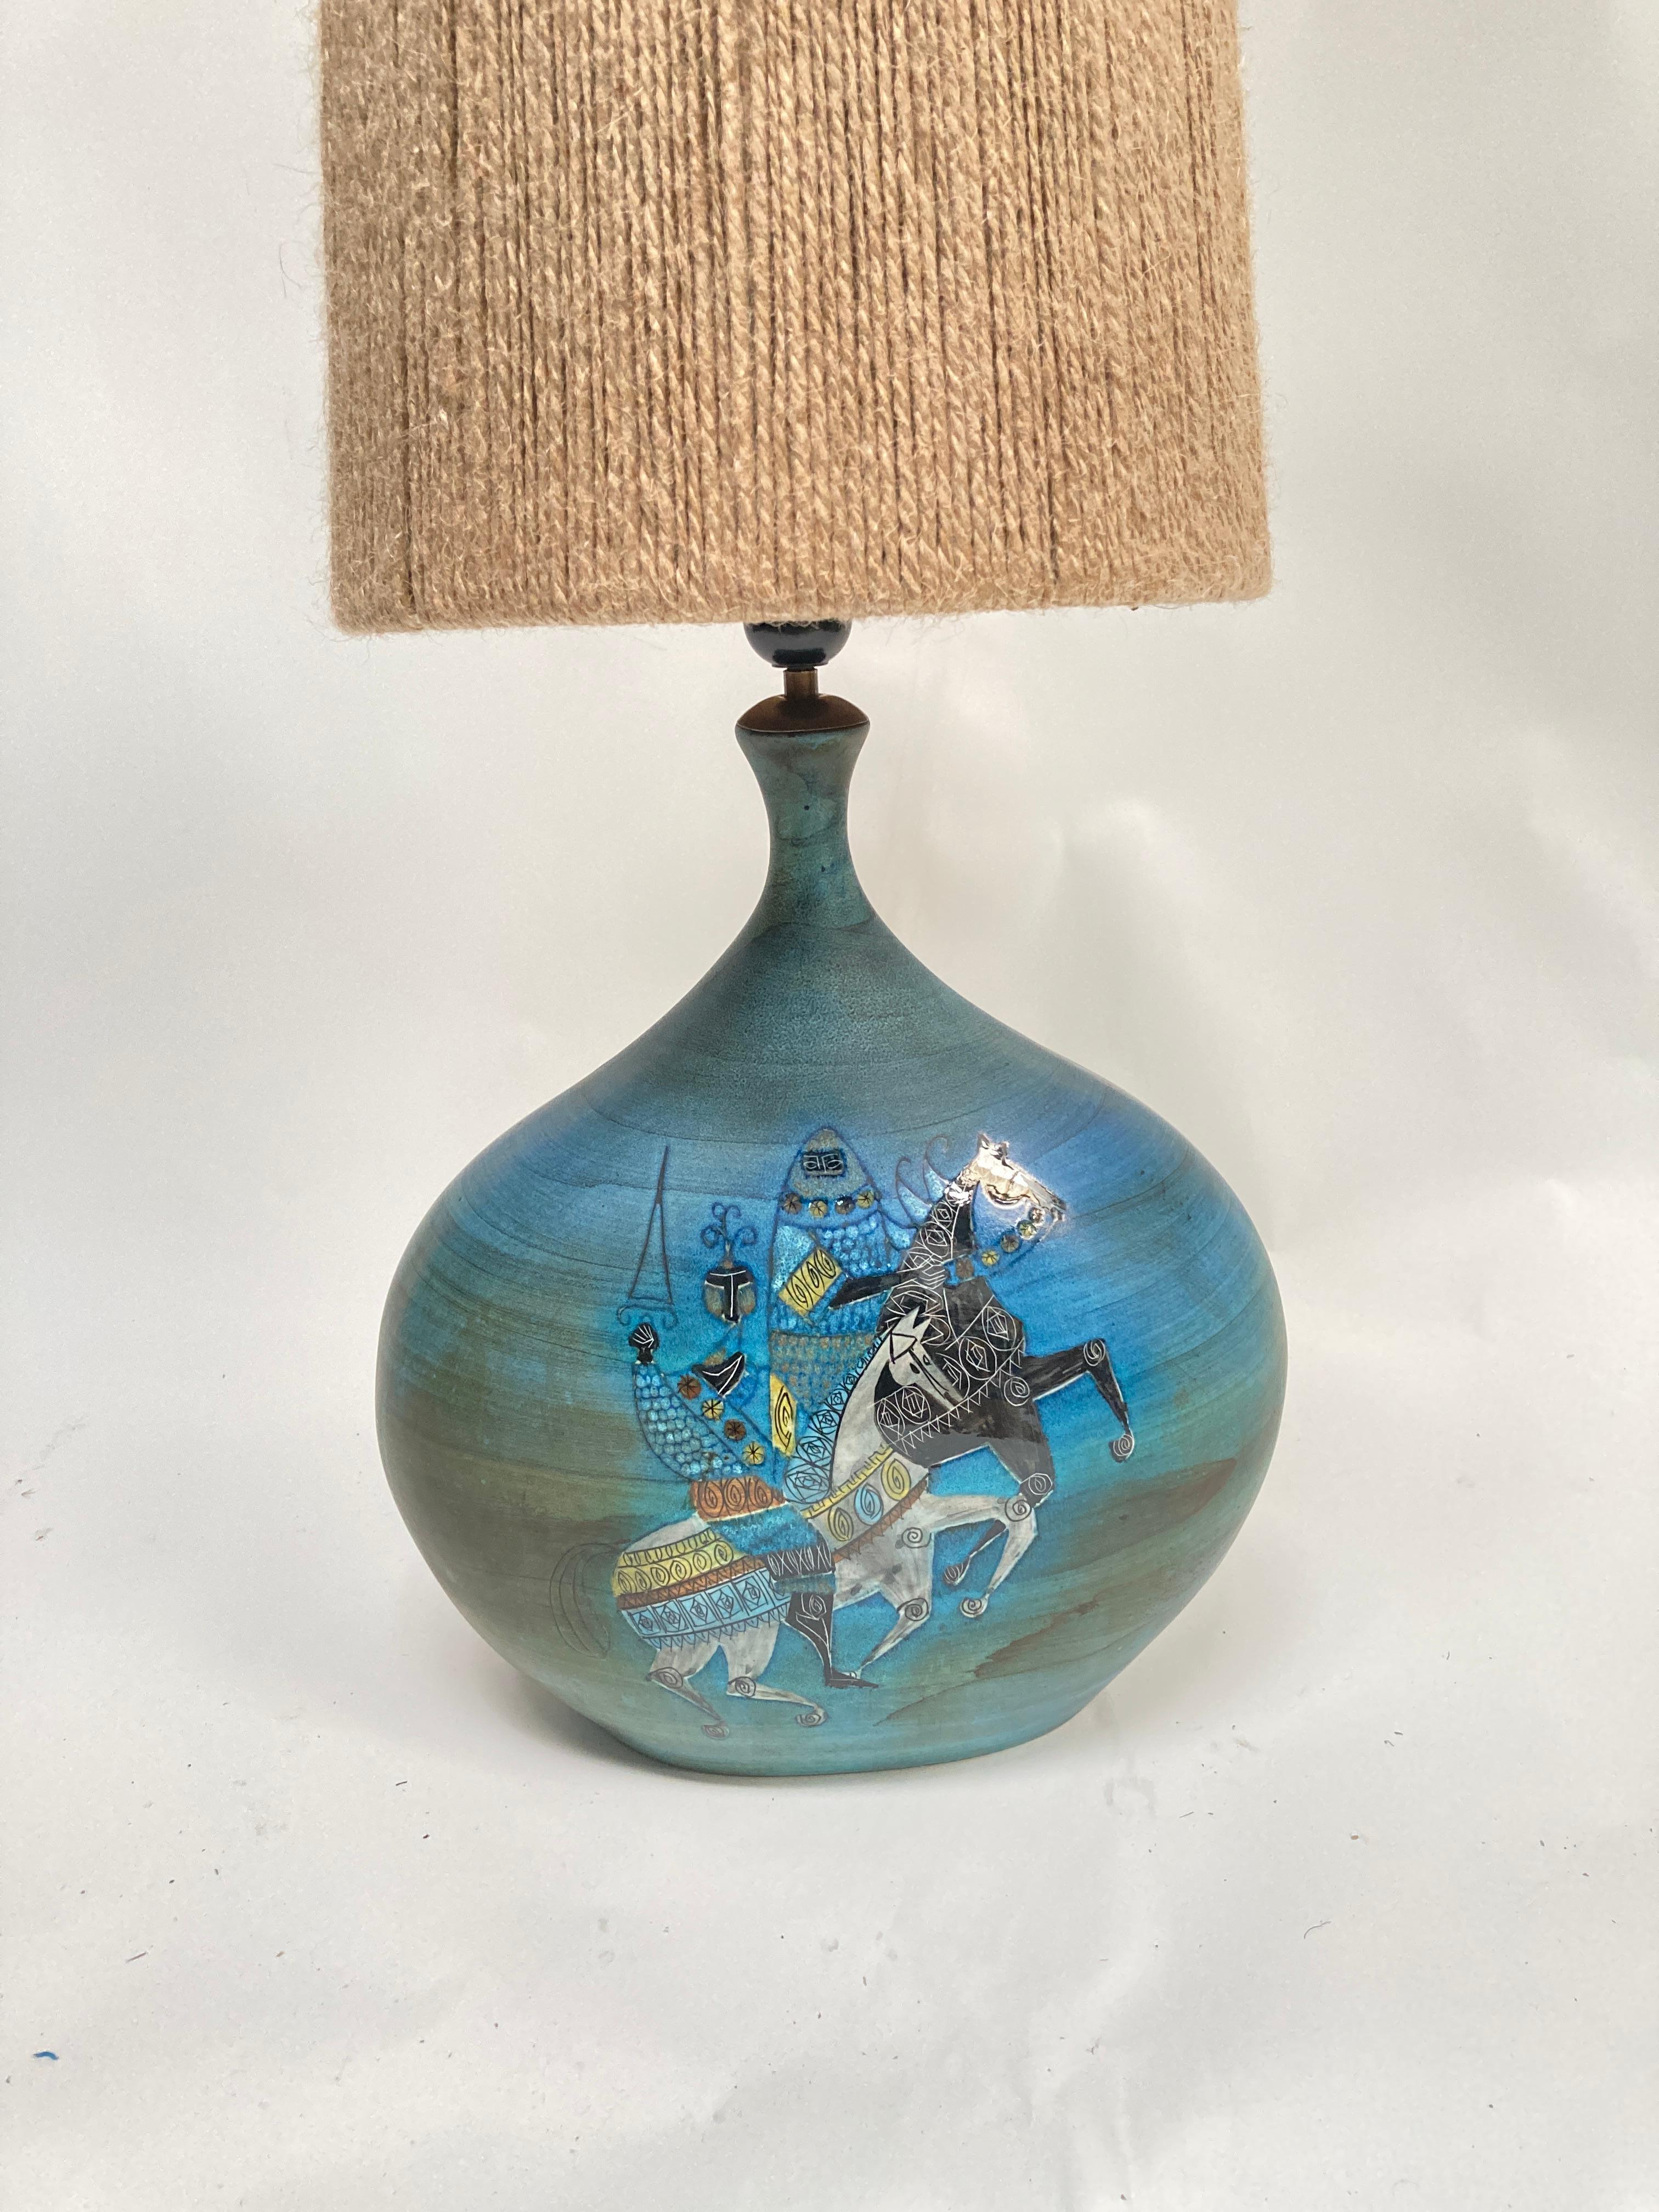 Very nice table lamp from French artist Jean de Lespinas
Great color, very nice shape 
Signed